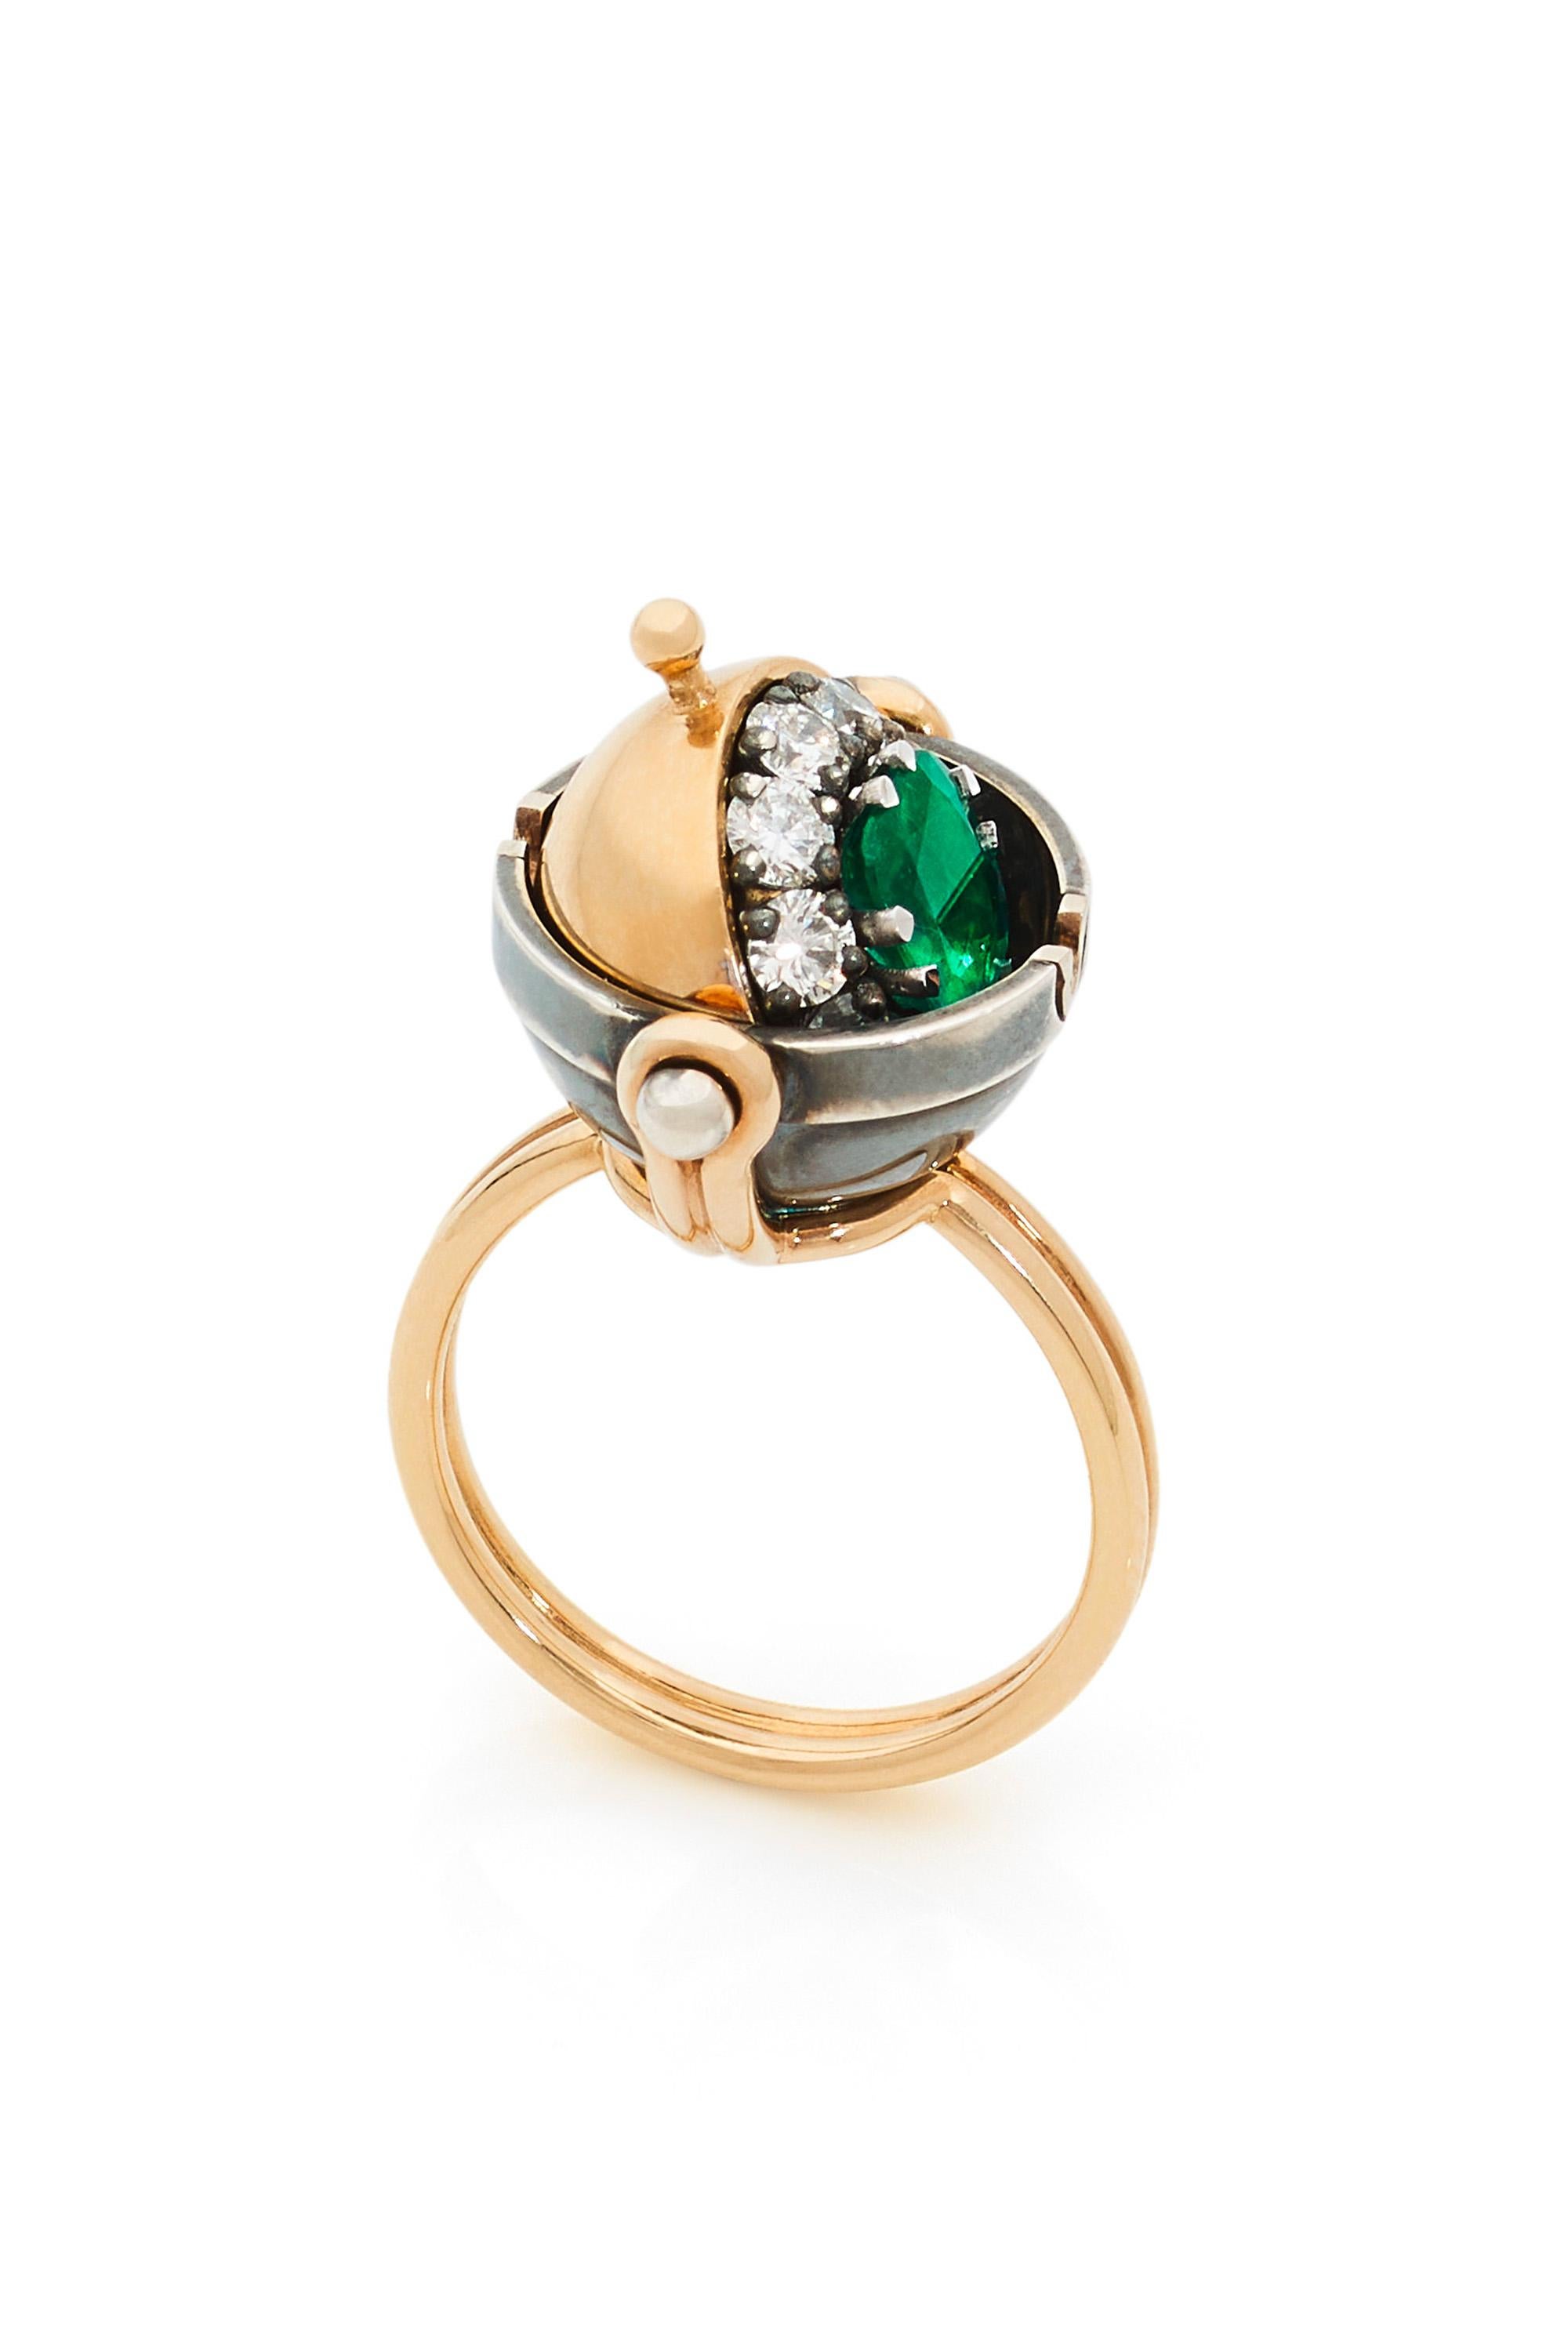 Gold and distressed silver ring. Rotating sphere set with a star diamond and revealing a cushion-cut emerald surrounded by diamonds.

Details:
Emerald: 0.8 cts
10 Diamonds: 0.65 cts
18k Gold: 6.6 g 
Distressed Silver: 5 g 
Made in France